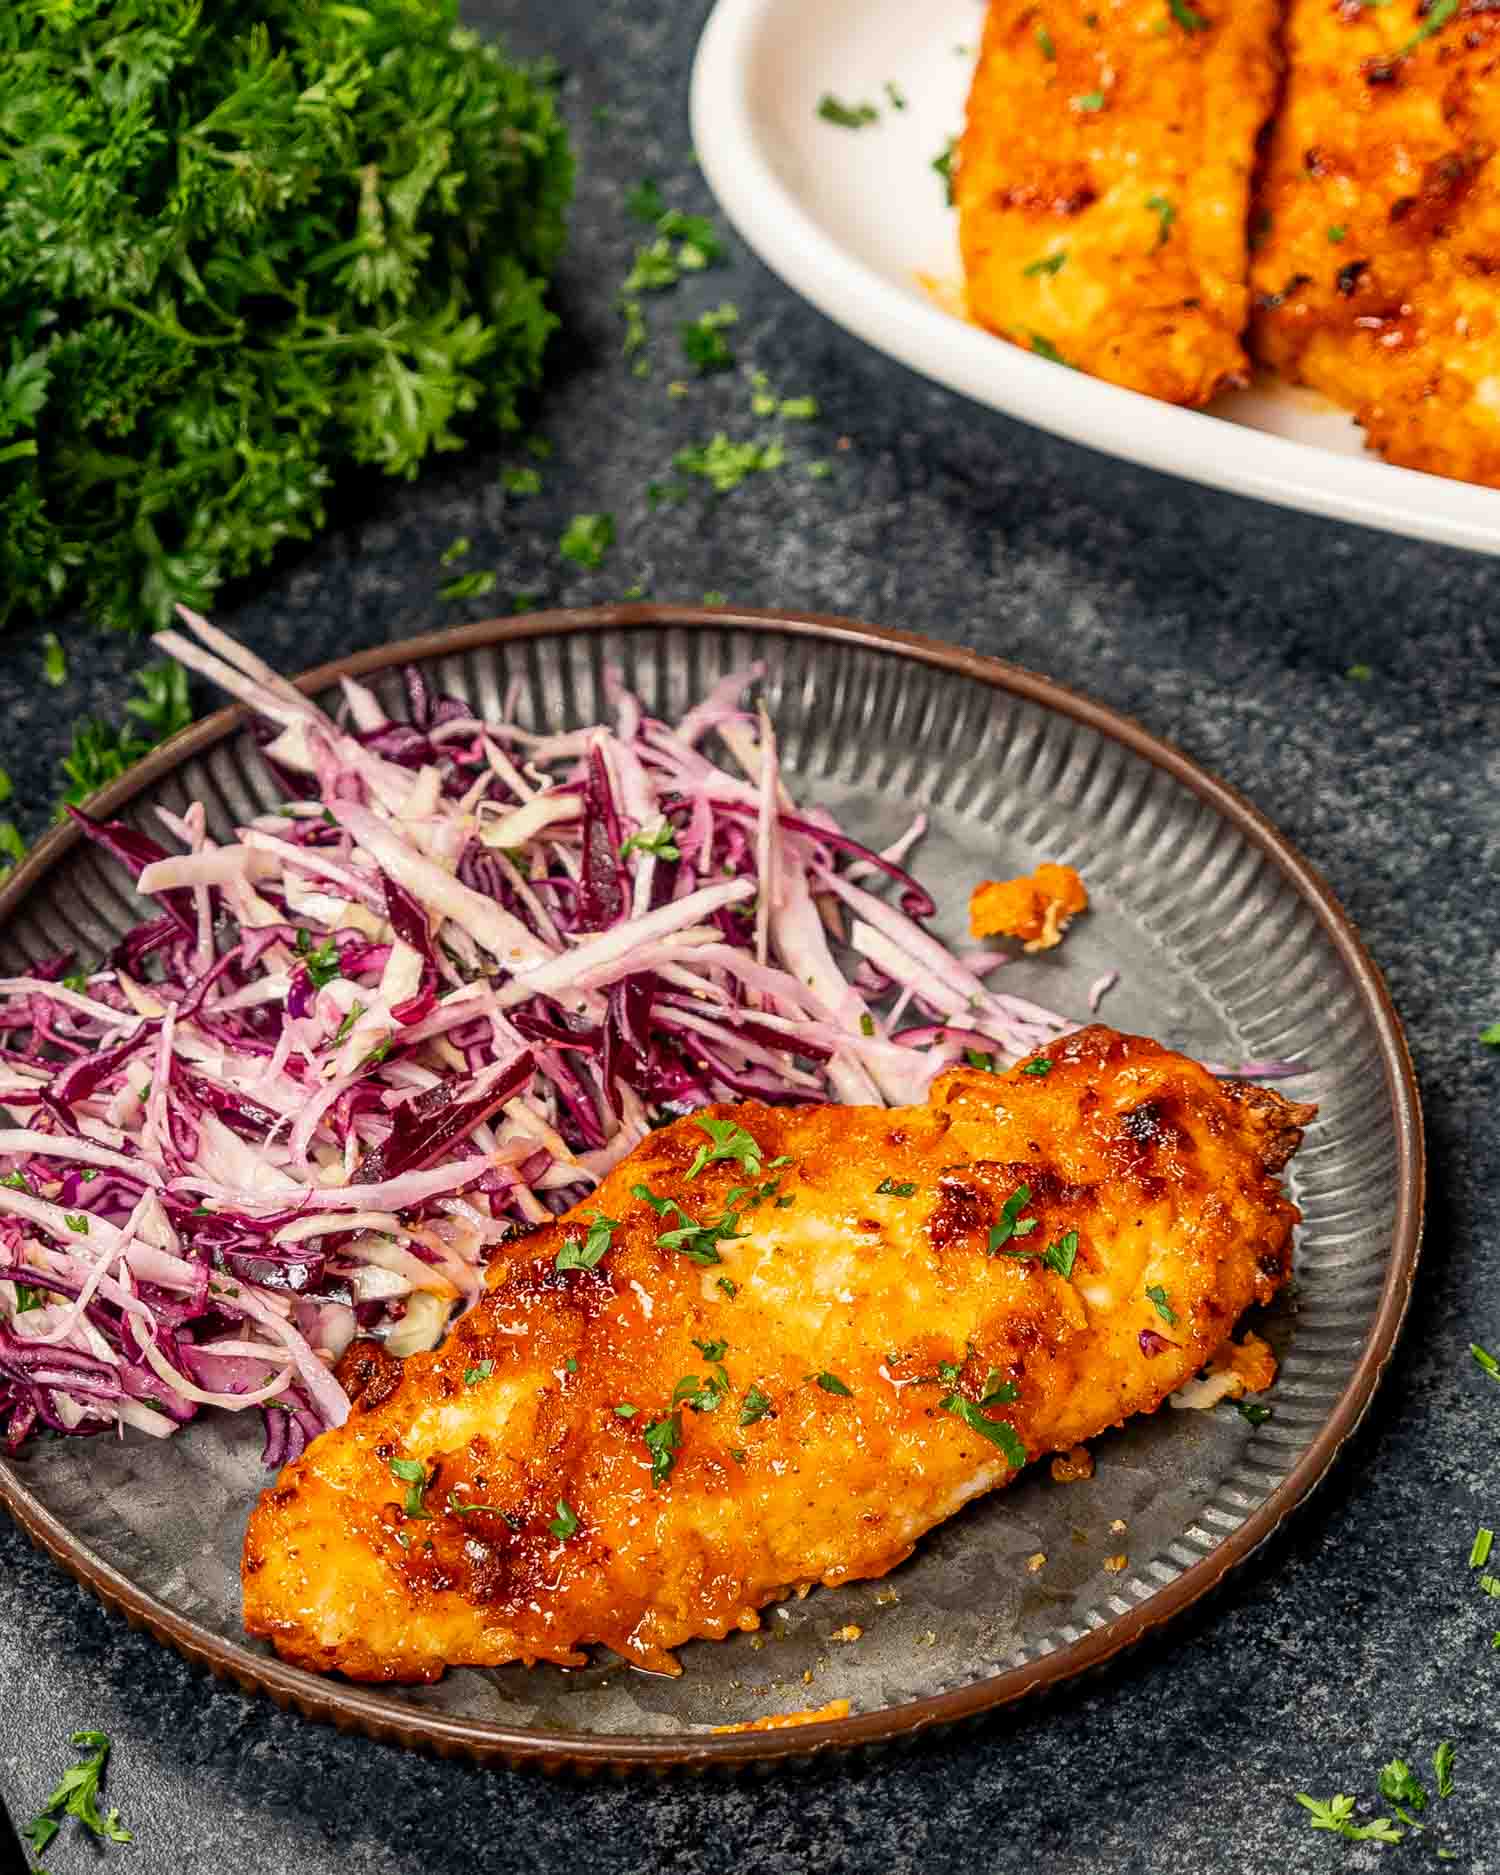 a hot honey chicken breast in a metal plate along a cabbage salad.